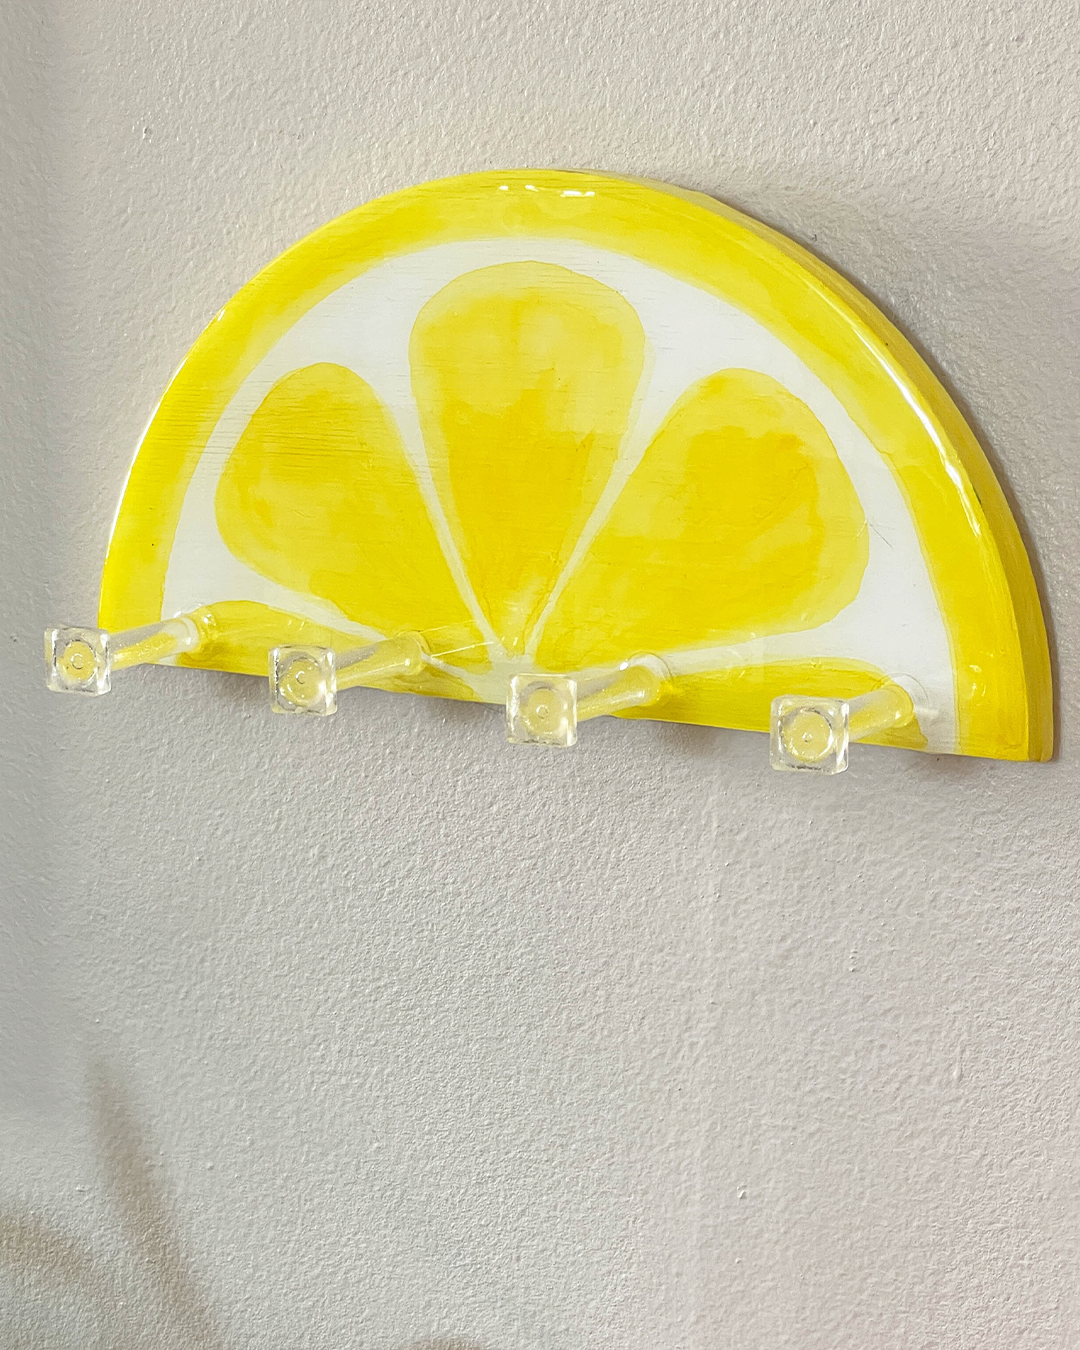 Wooden key holder painted to look like a lemon slice, a unique and patent-pending design for stylish organization.